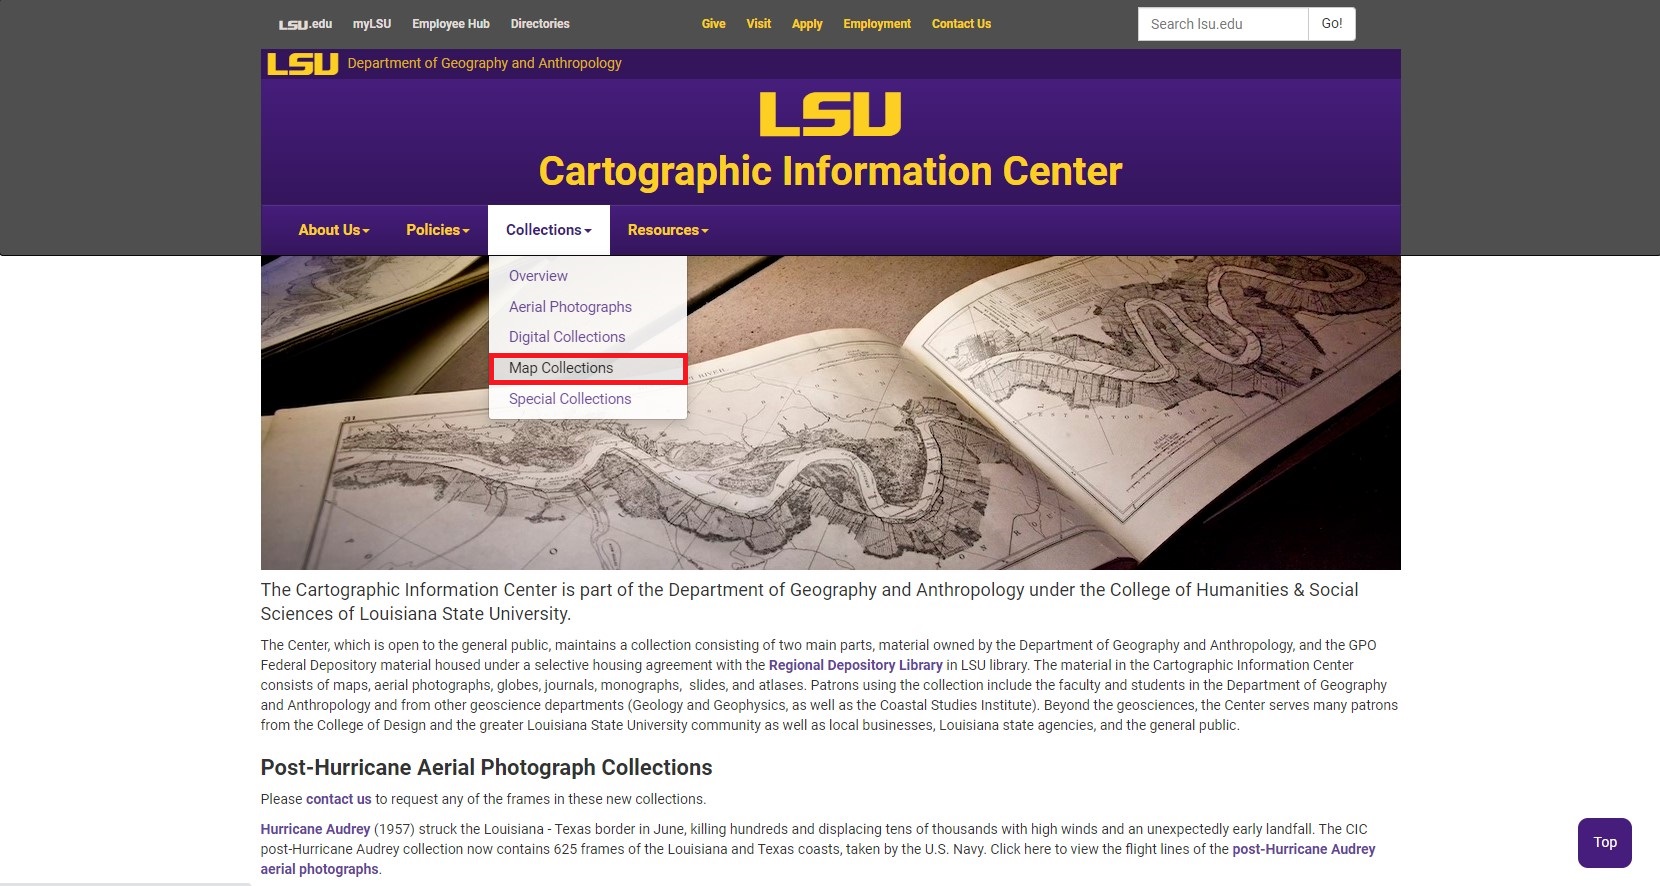 Map collections selection highlighted